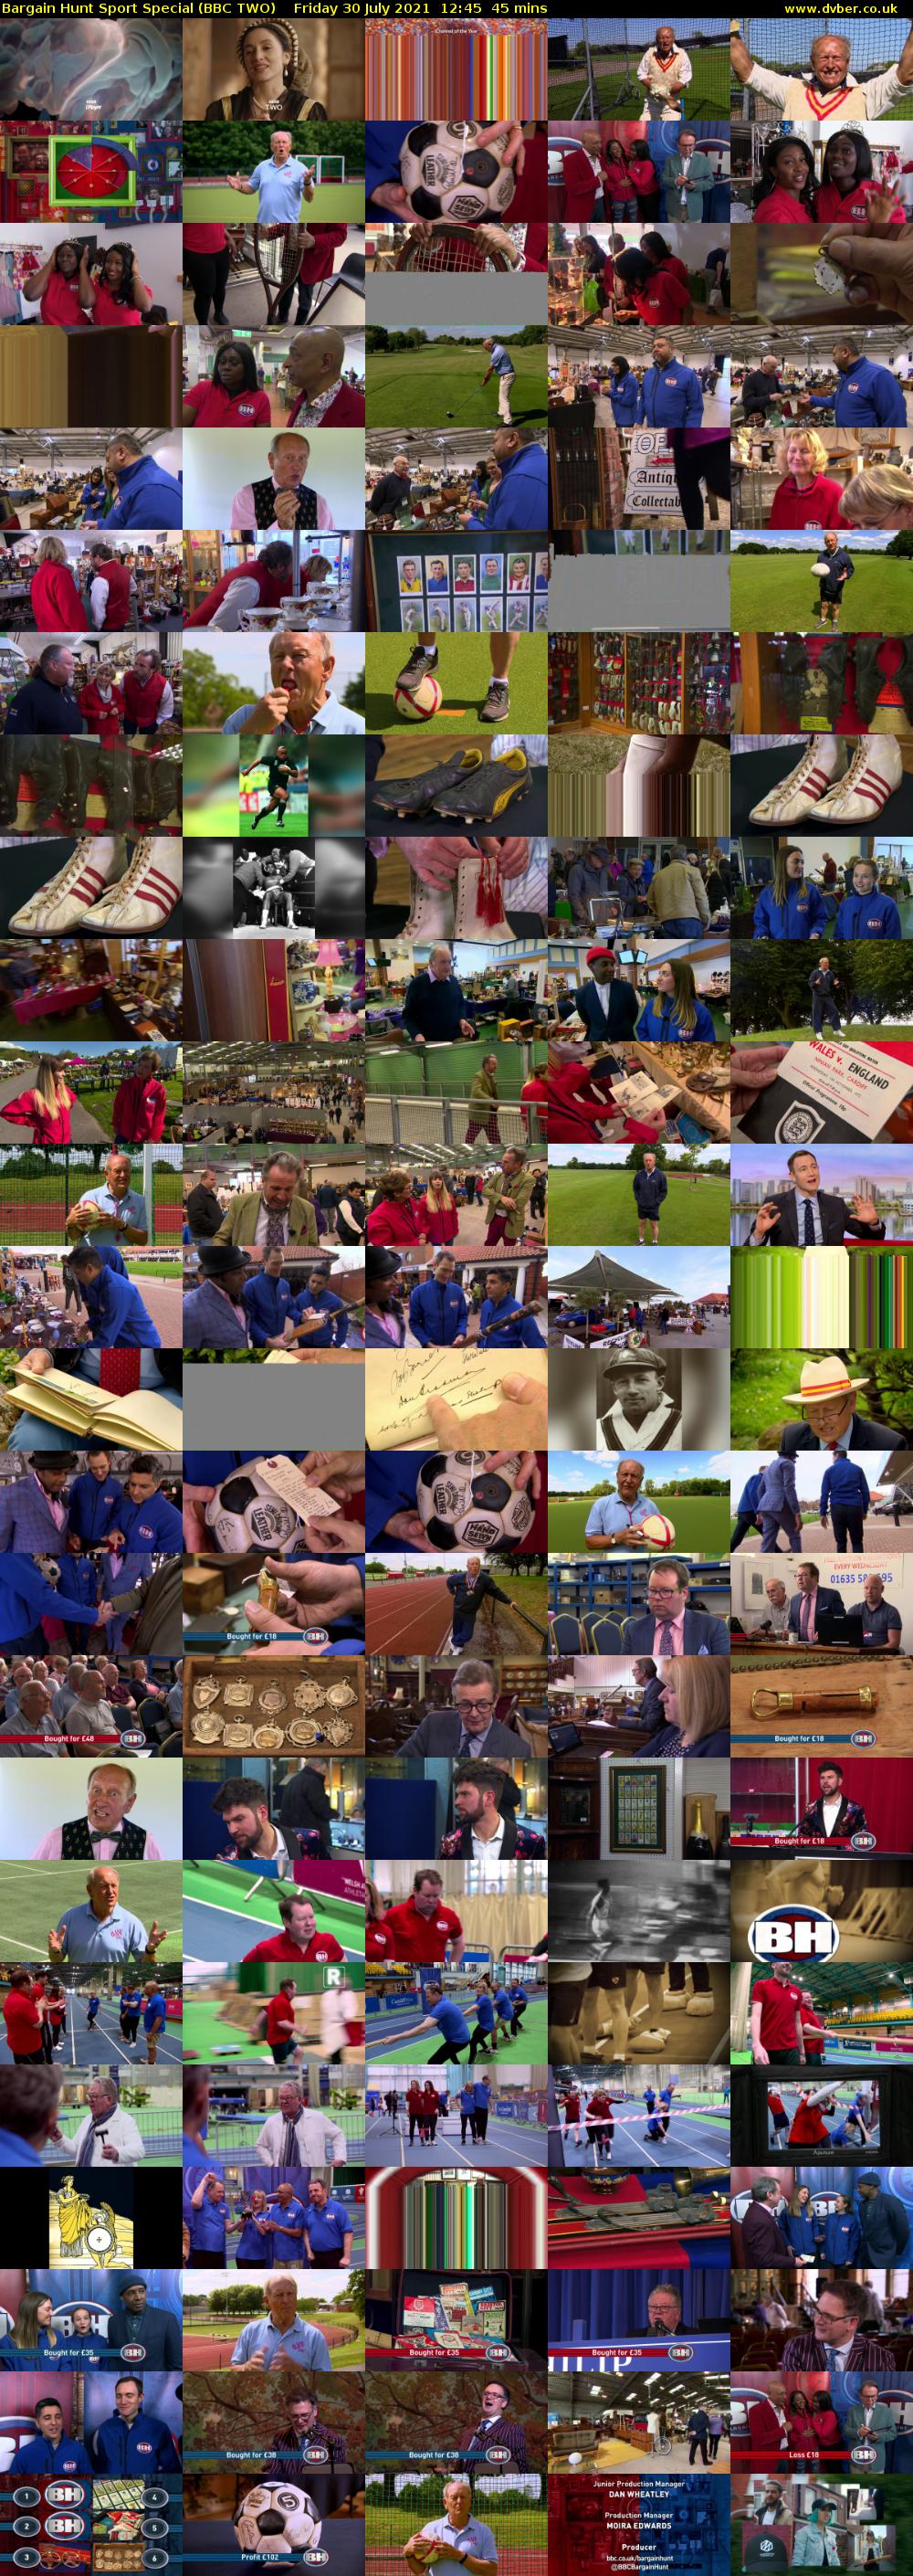 Bargain Hunt Sport Special (BBC TWO) Friday 30 July 2021 12:45 - 13:30